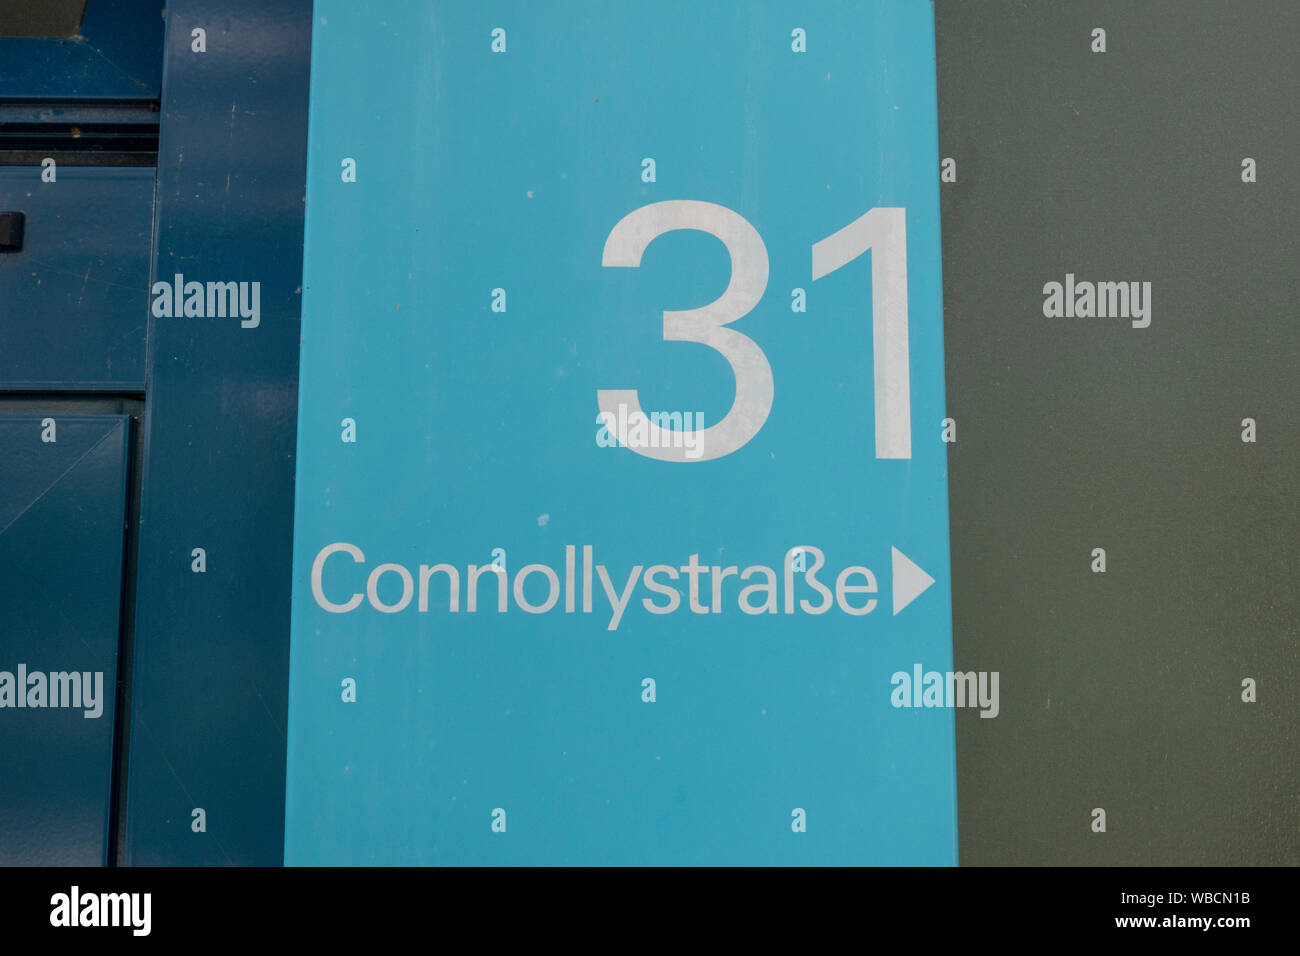 Connollystraße 31 address plate, site of the Munich massacre during the 1972 Summer Olympics in Munich, Germany. Stock Photo